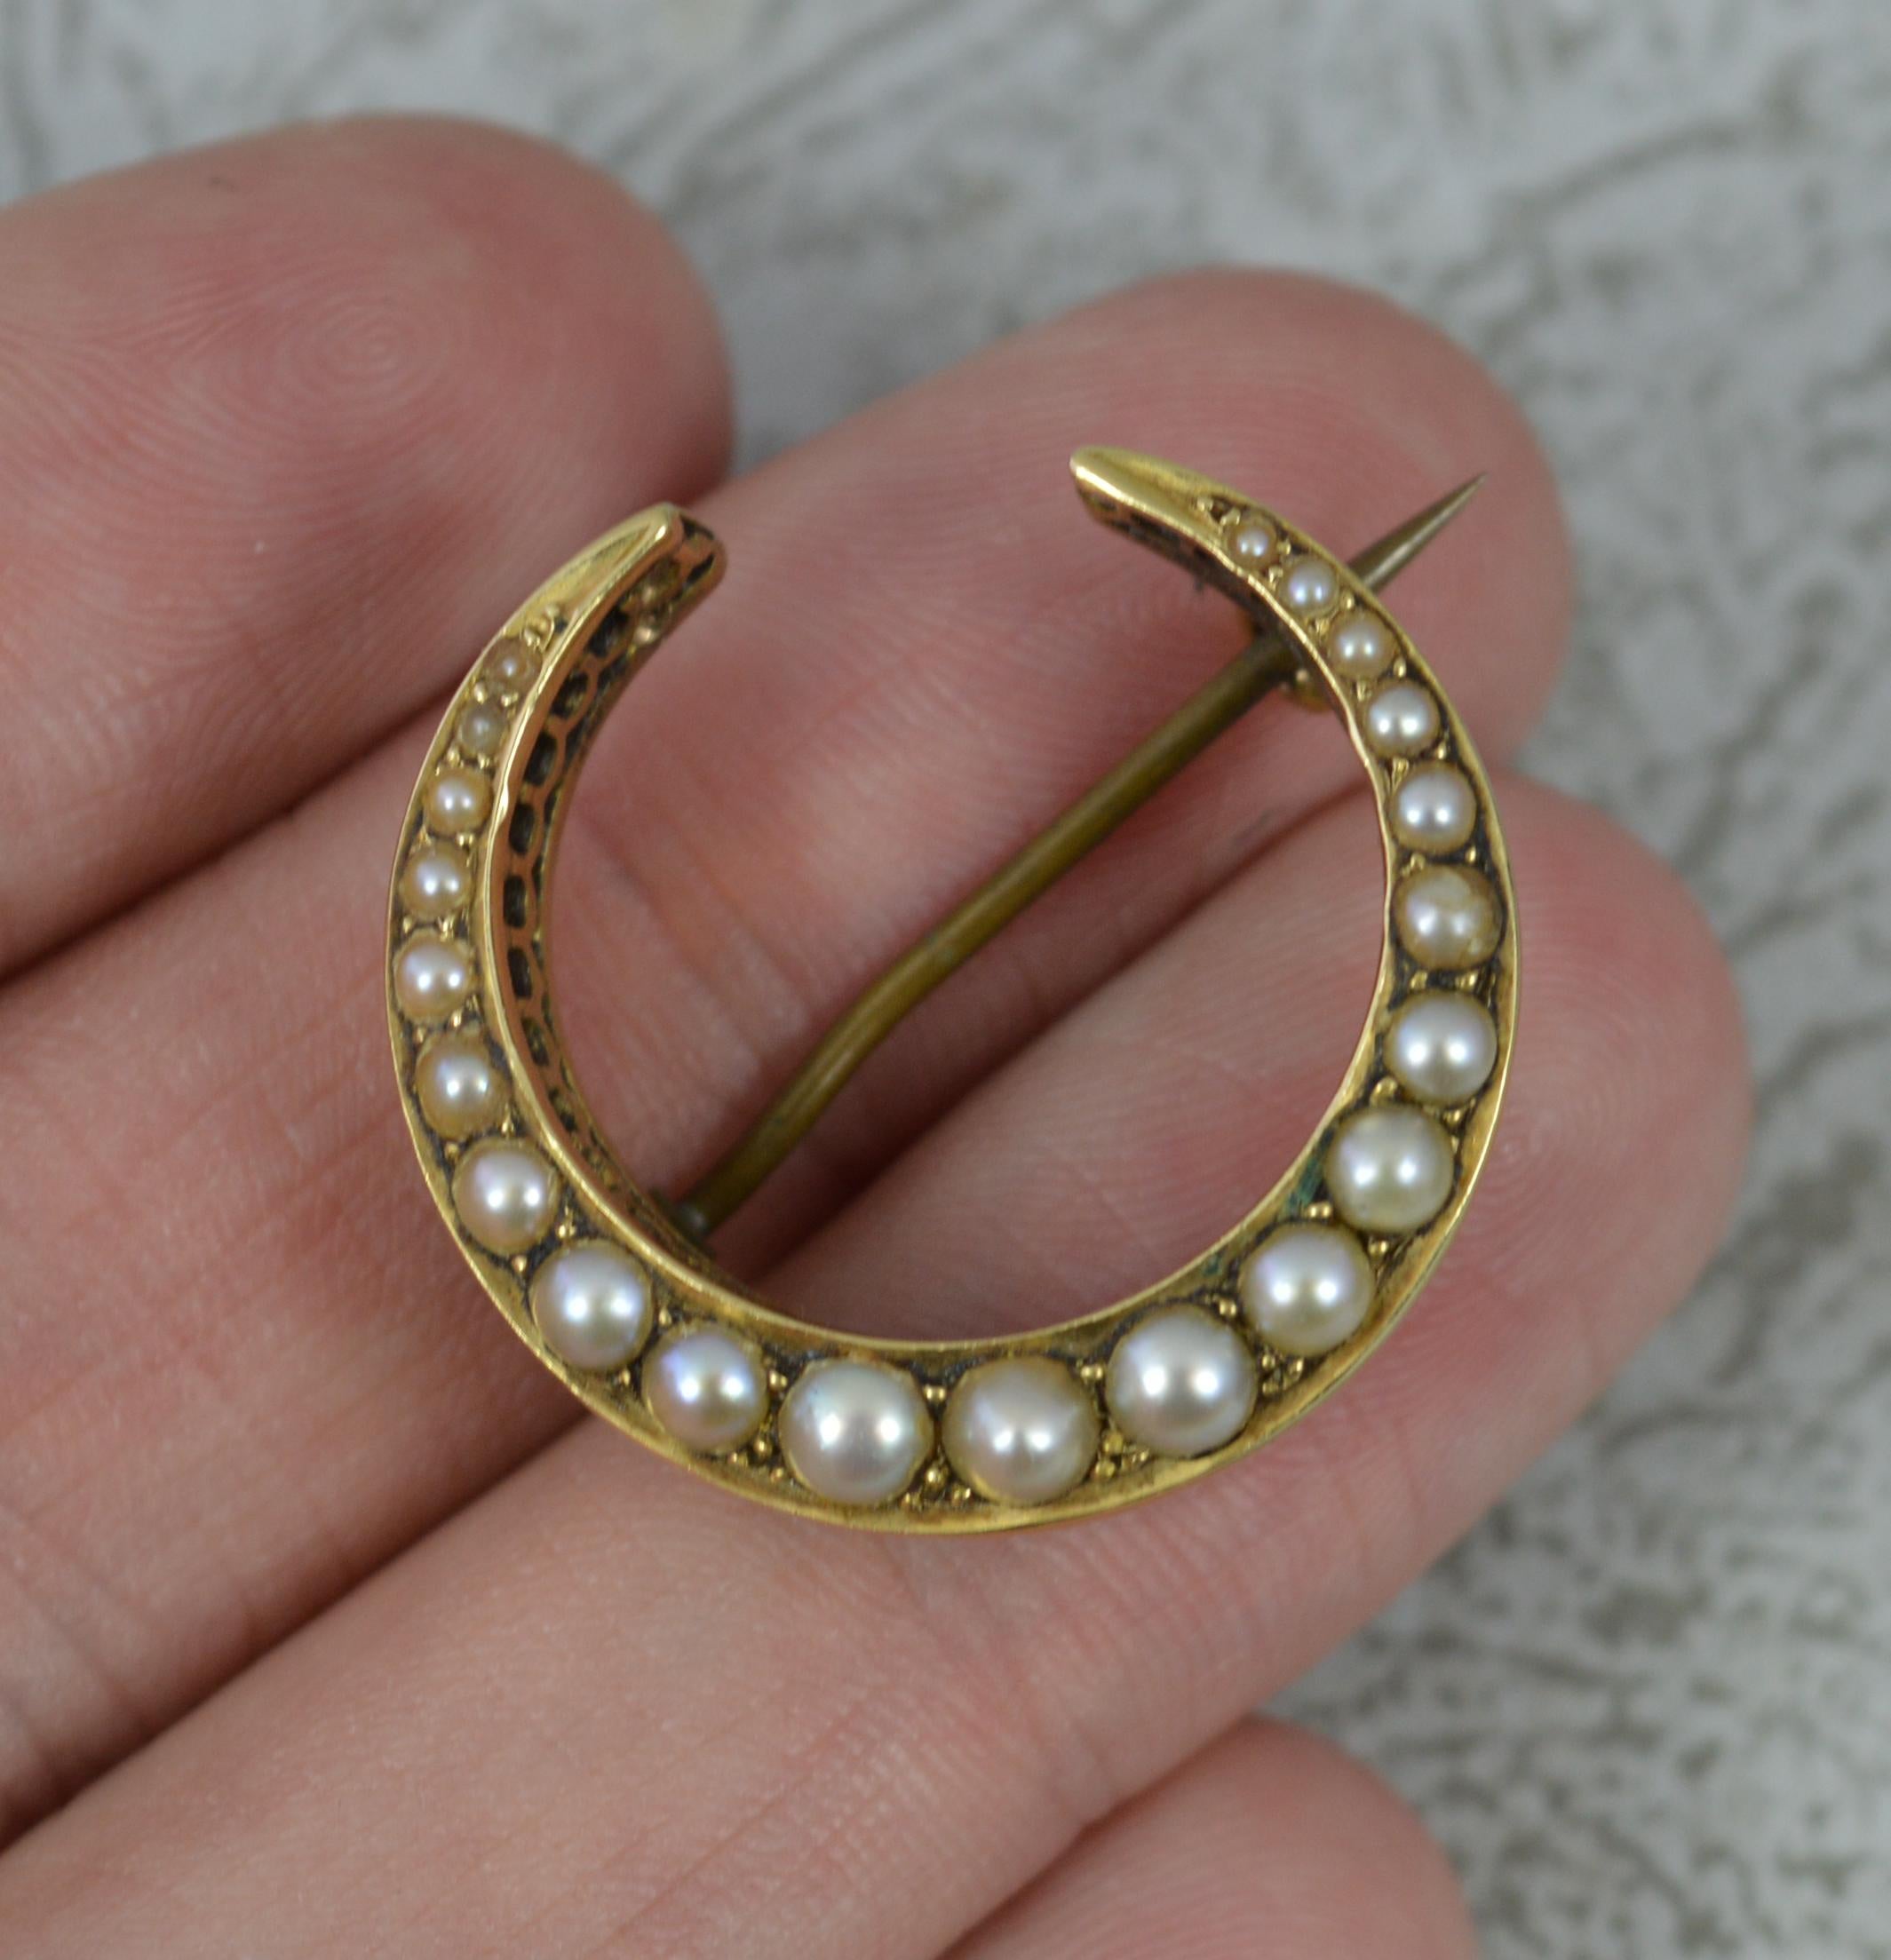 A late Victorian period brooch.
Solid 15 carat yellow gold example.
Set with natural pearls of graduated size.
An ever popular crescent shape.

CONDITION ; Excellent. Crisp pattern. Working pin and hinge. Securely set pearls. All look to be